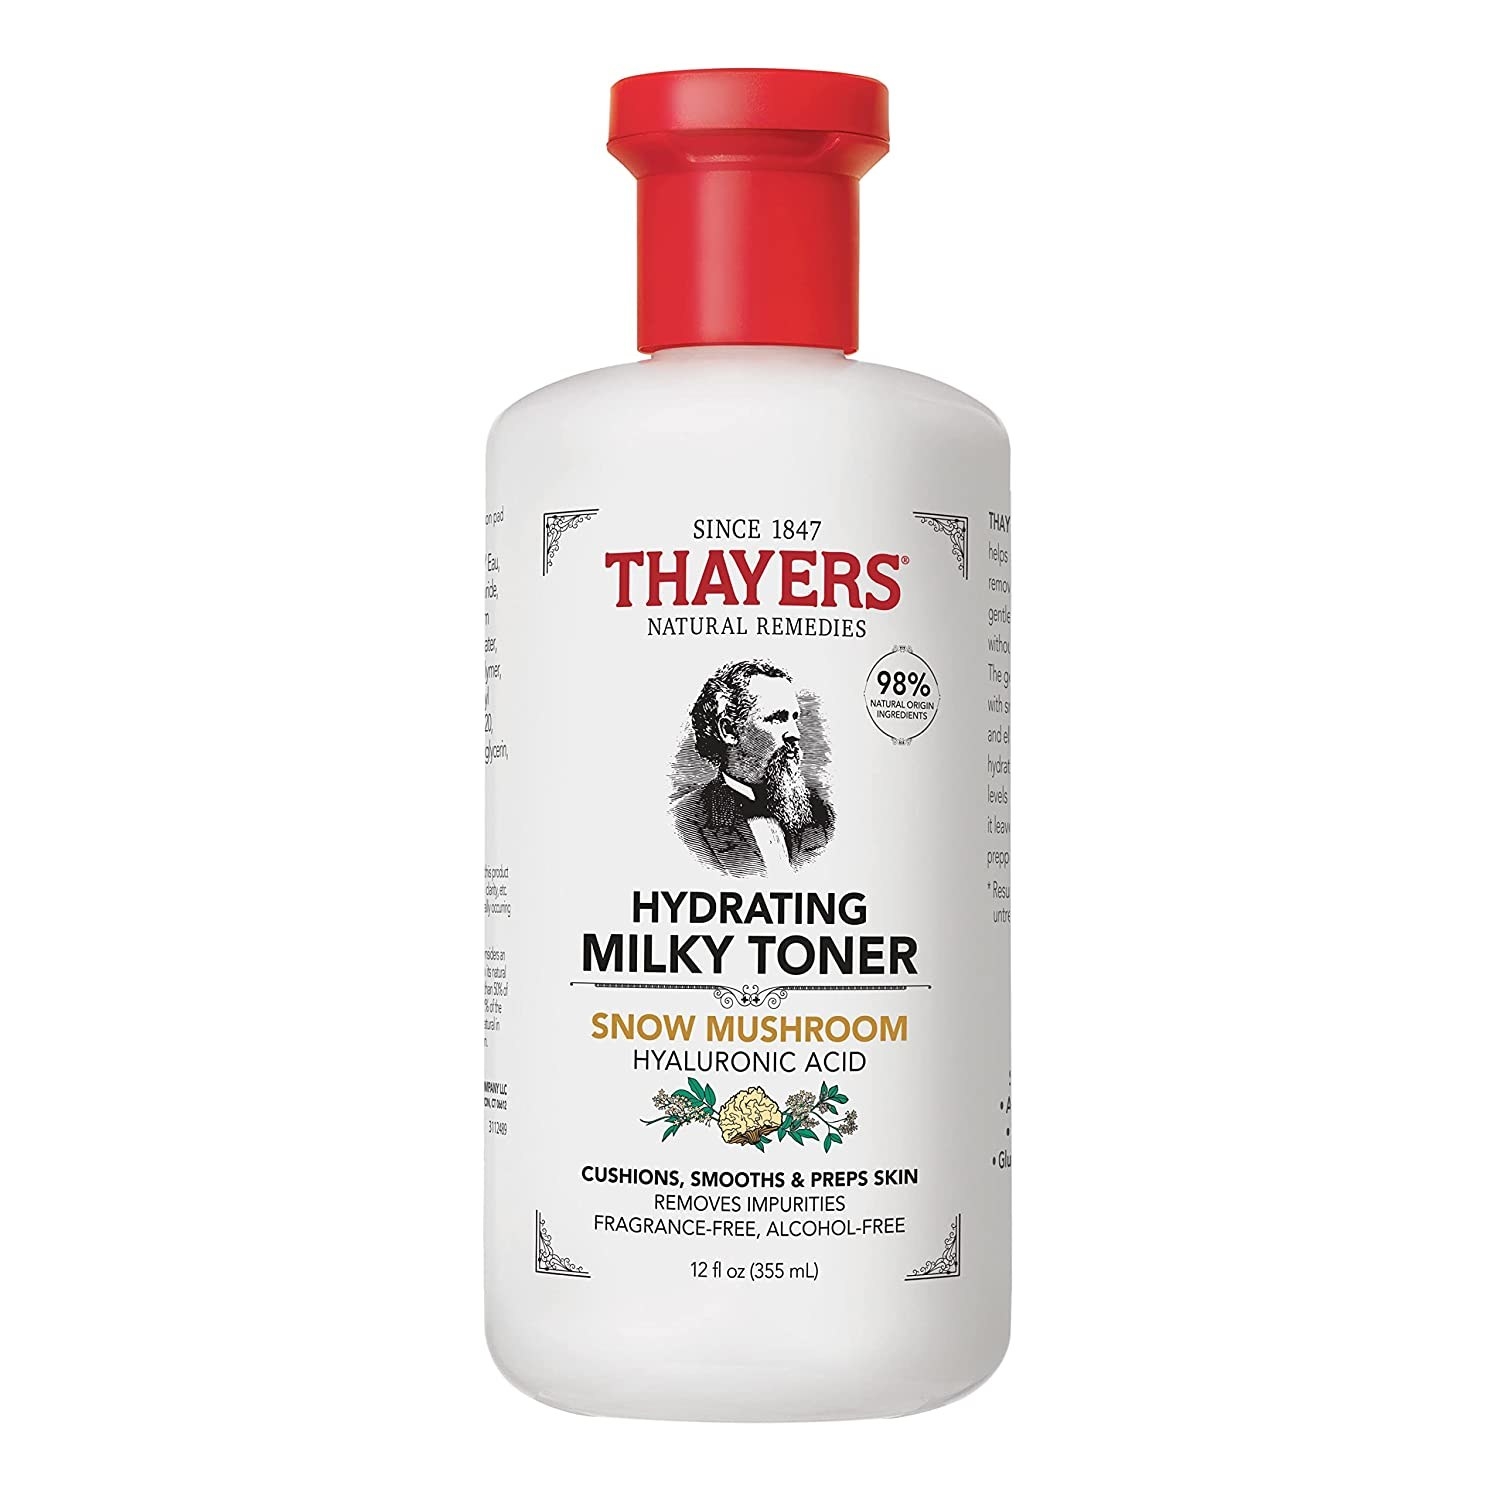 A photo of the white bottle of toner